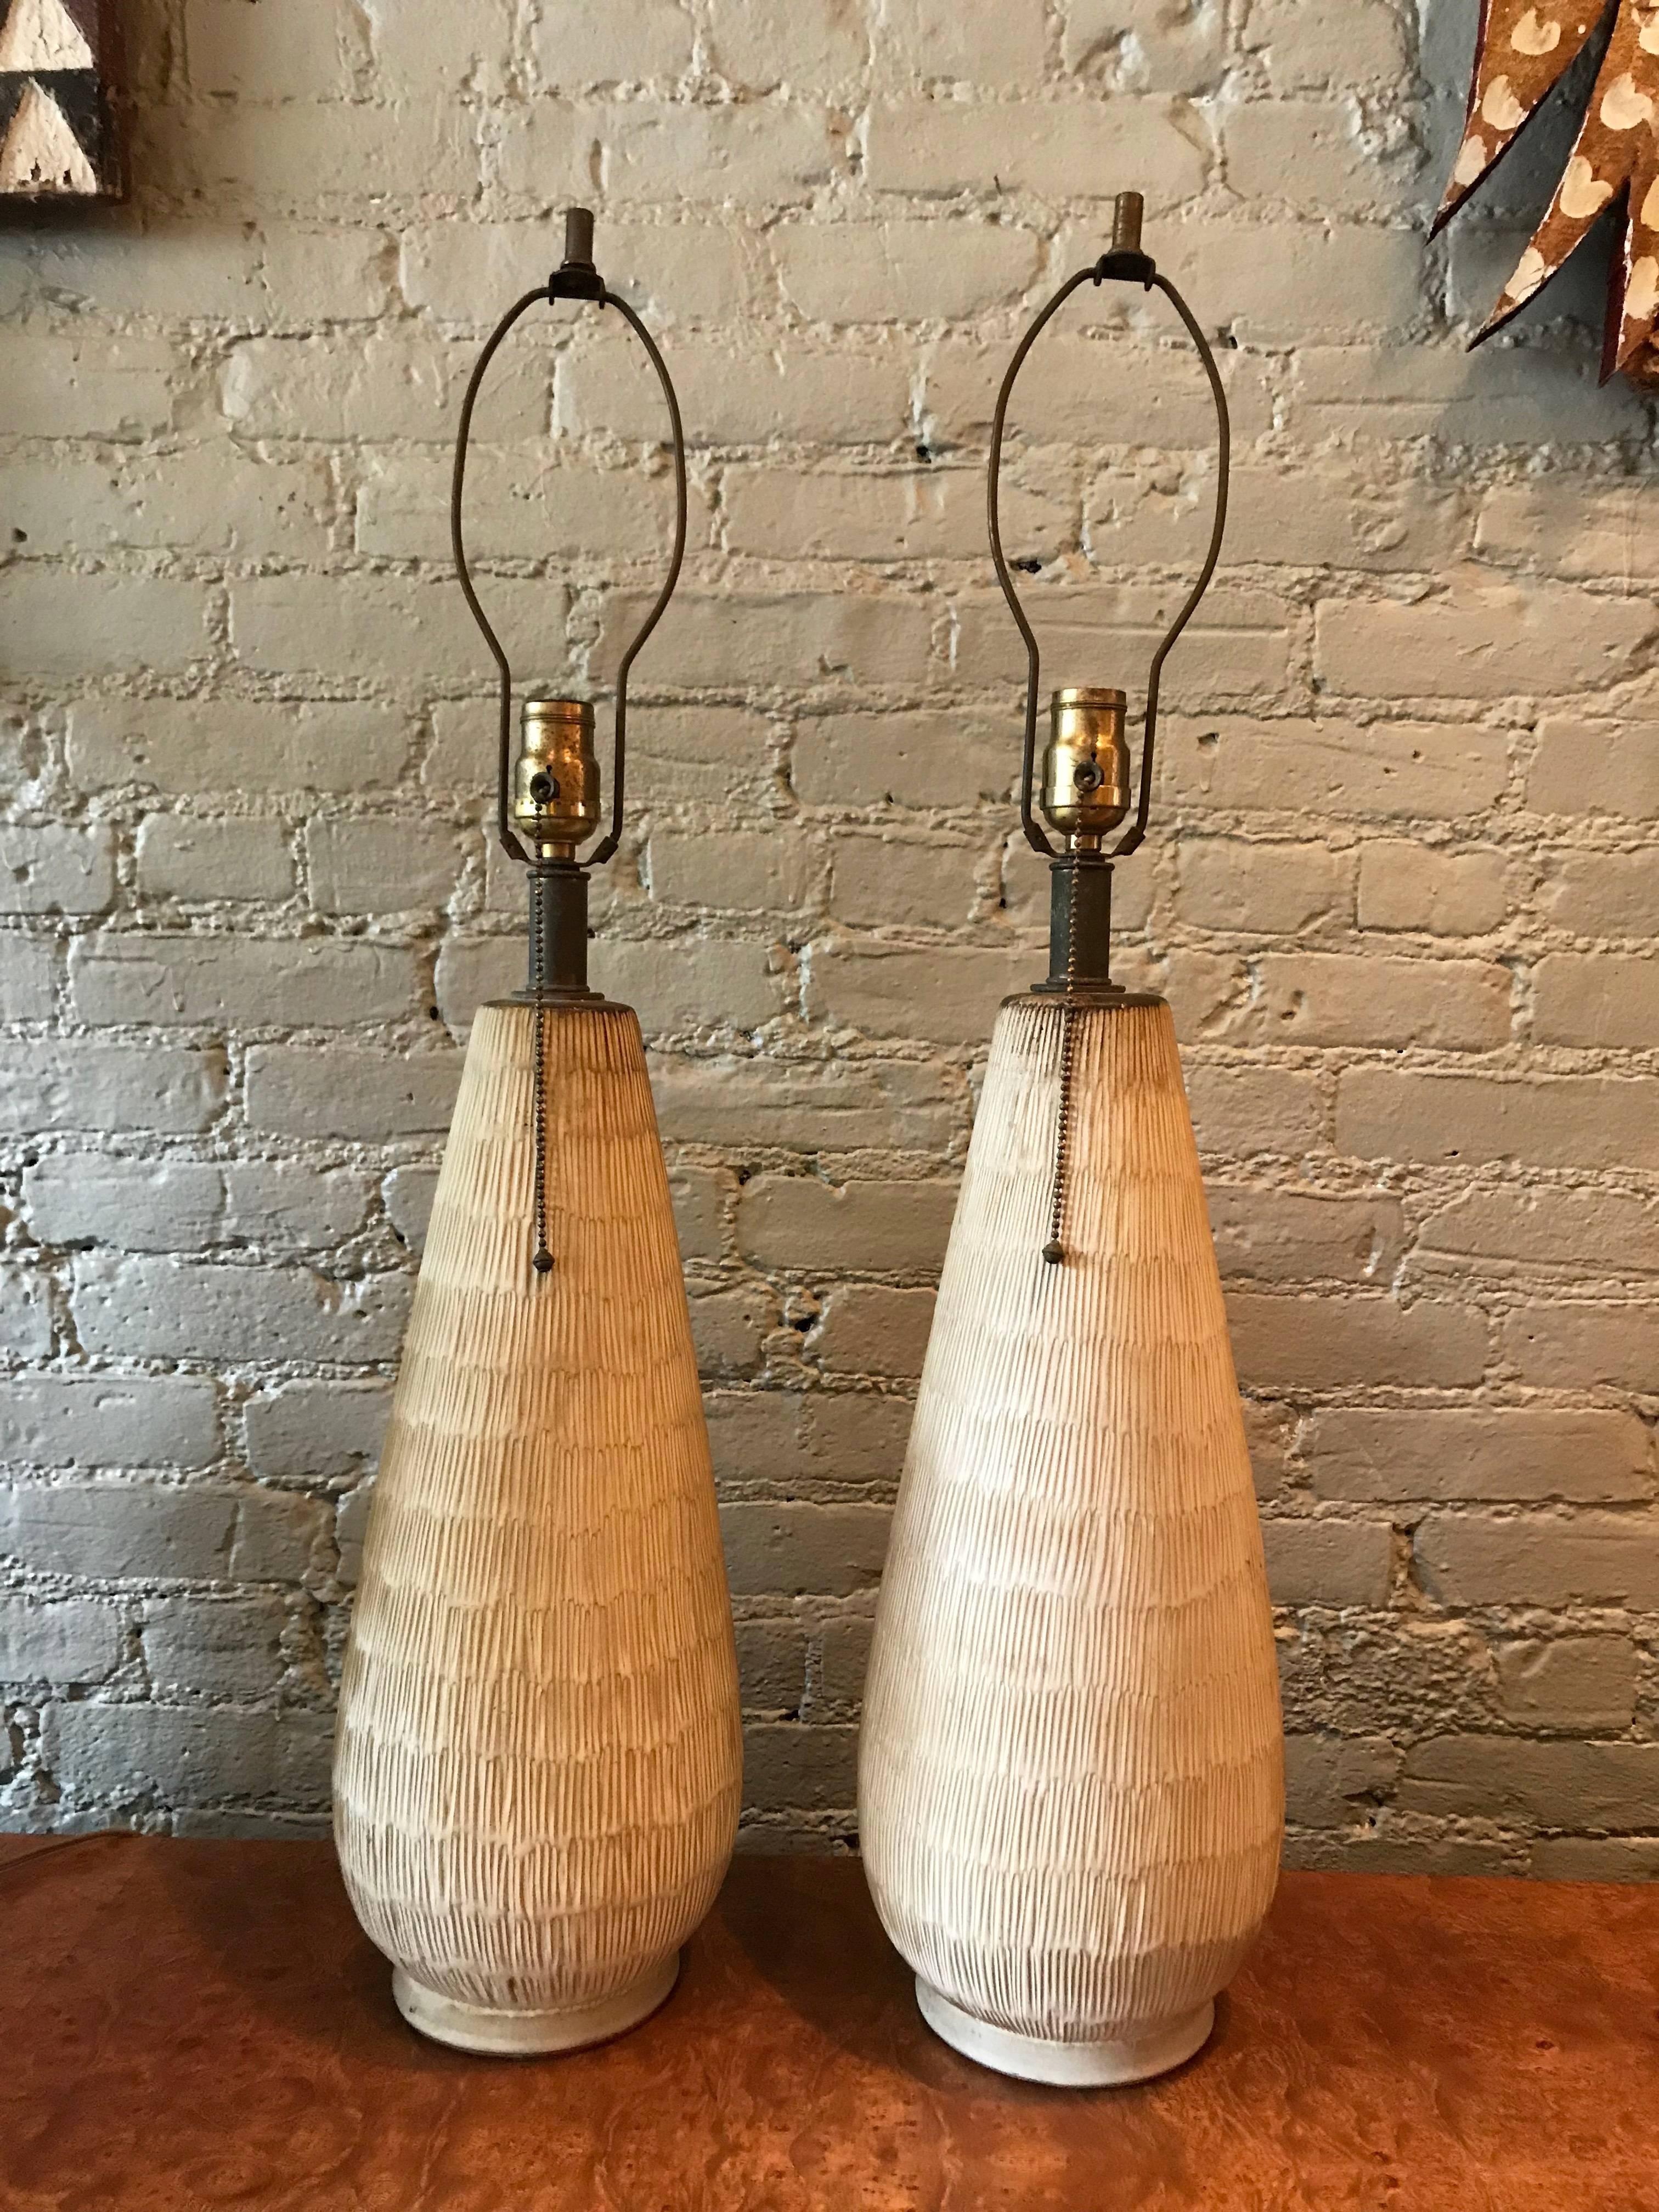 Pair of large Mid-Century Modern, studio, art pottery table lamps by Lee Rosen feature incised, earthenware ceramic bases with brass necks and pull chains. Height to the neck is 23 inches and overall height is 32 inches.